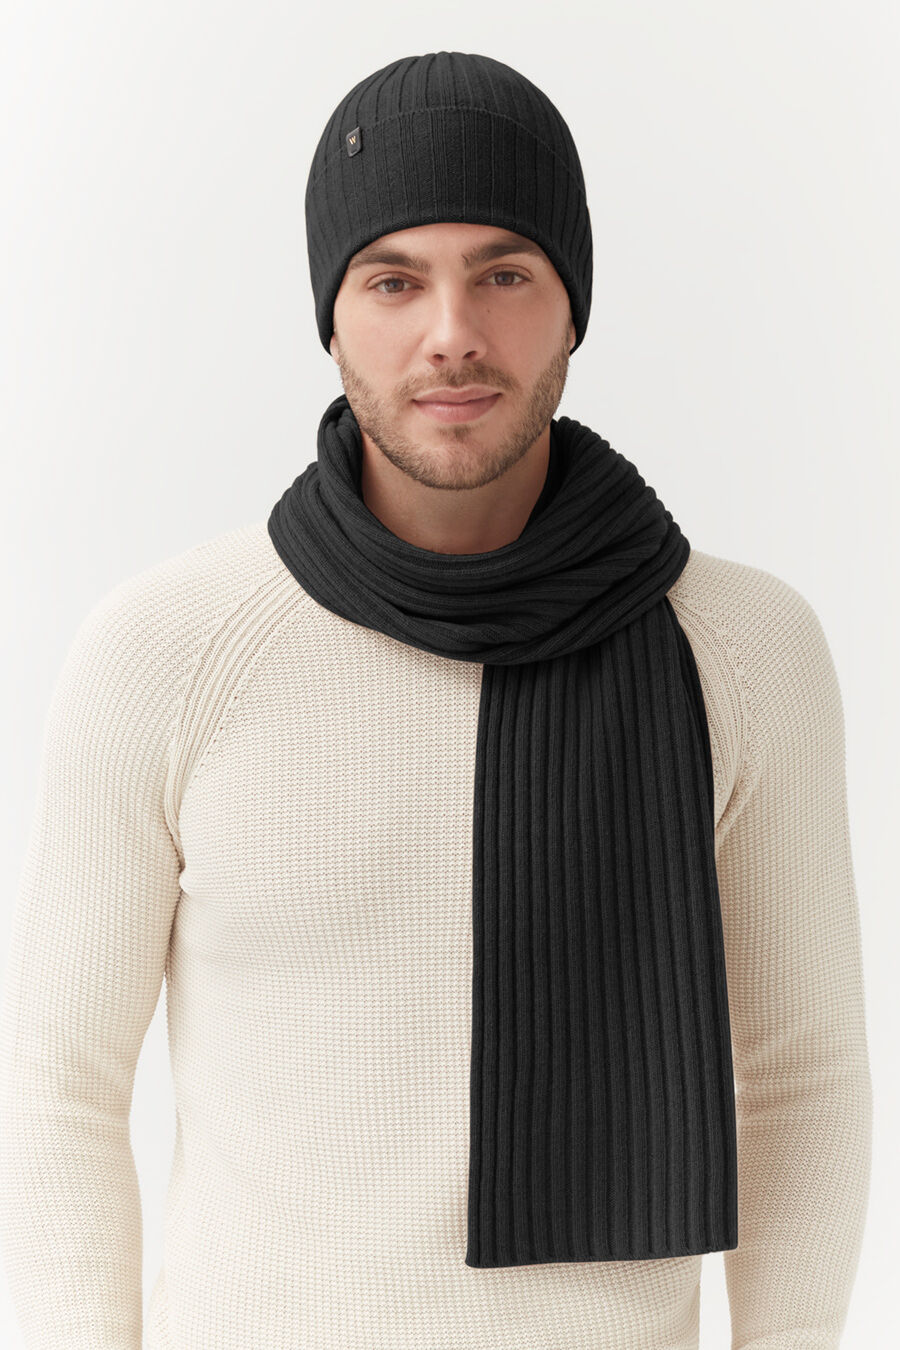 Man wearing a beanie and scarf over a sweater, looking at the camera.